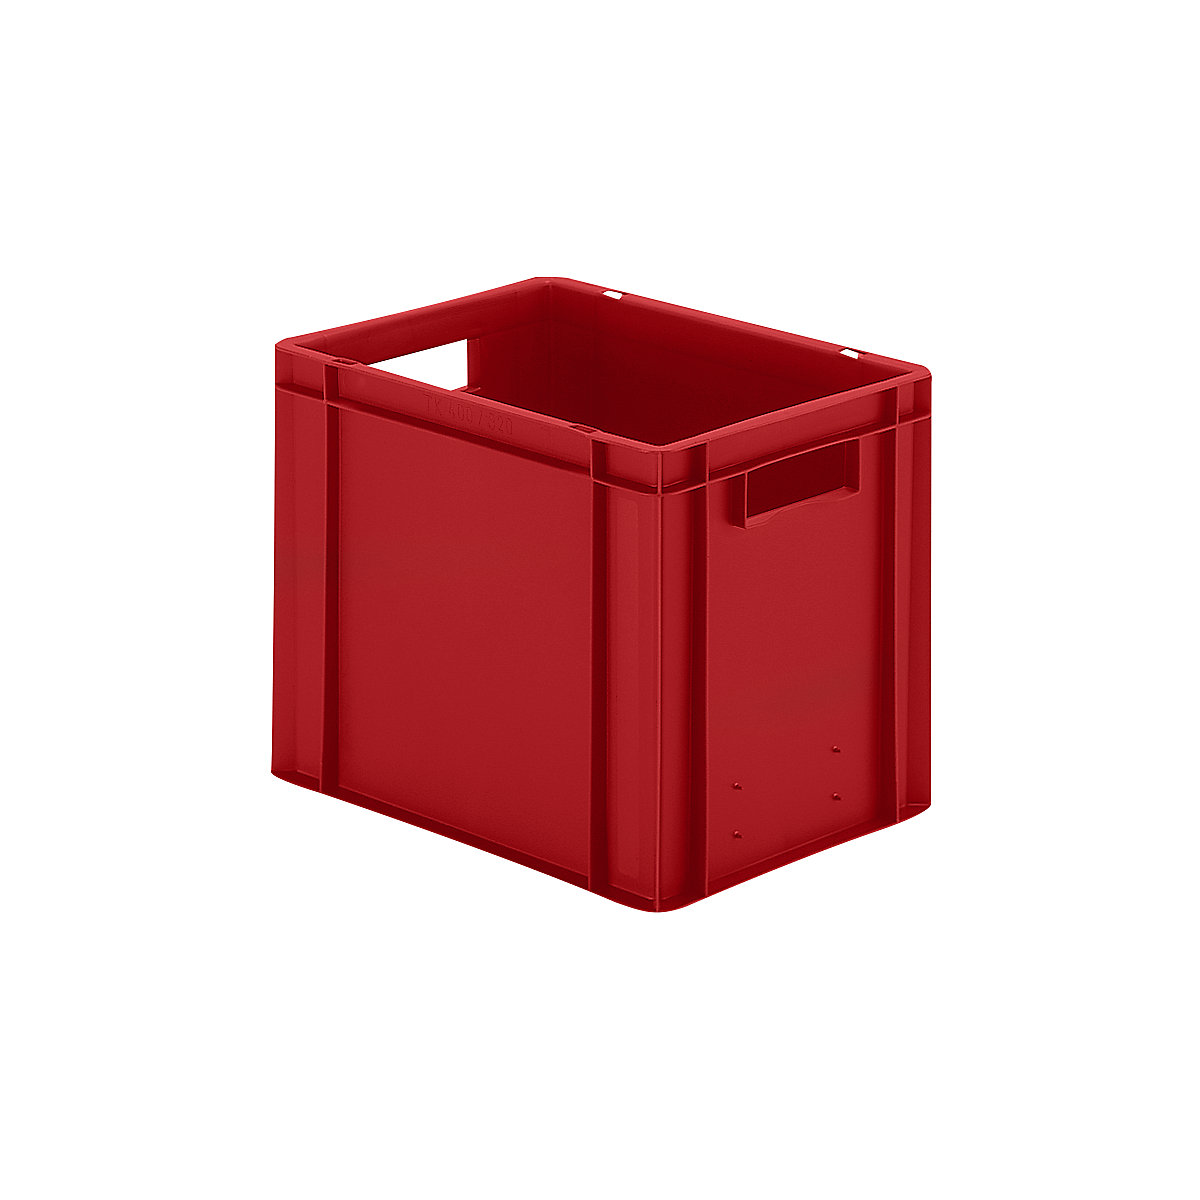 Euro stacking container, closed walls and base, LxWxH 400 x 300 x 320 mm, red, pack of 5